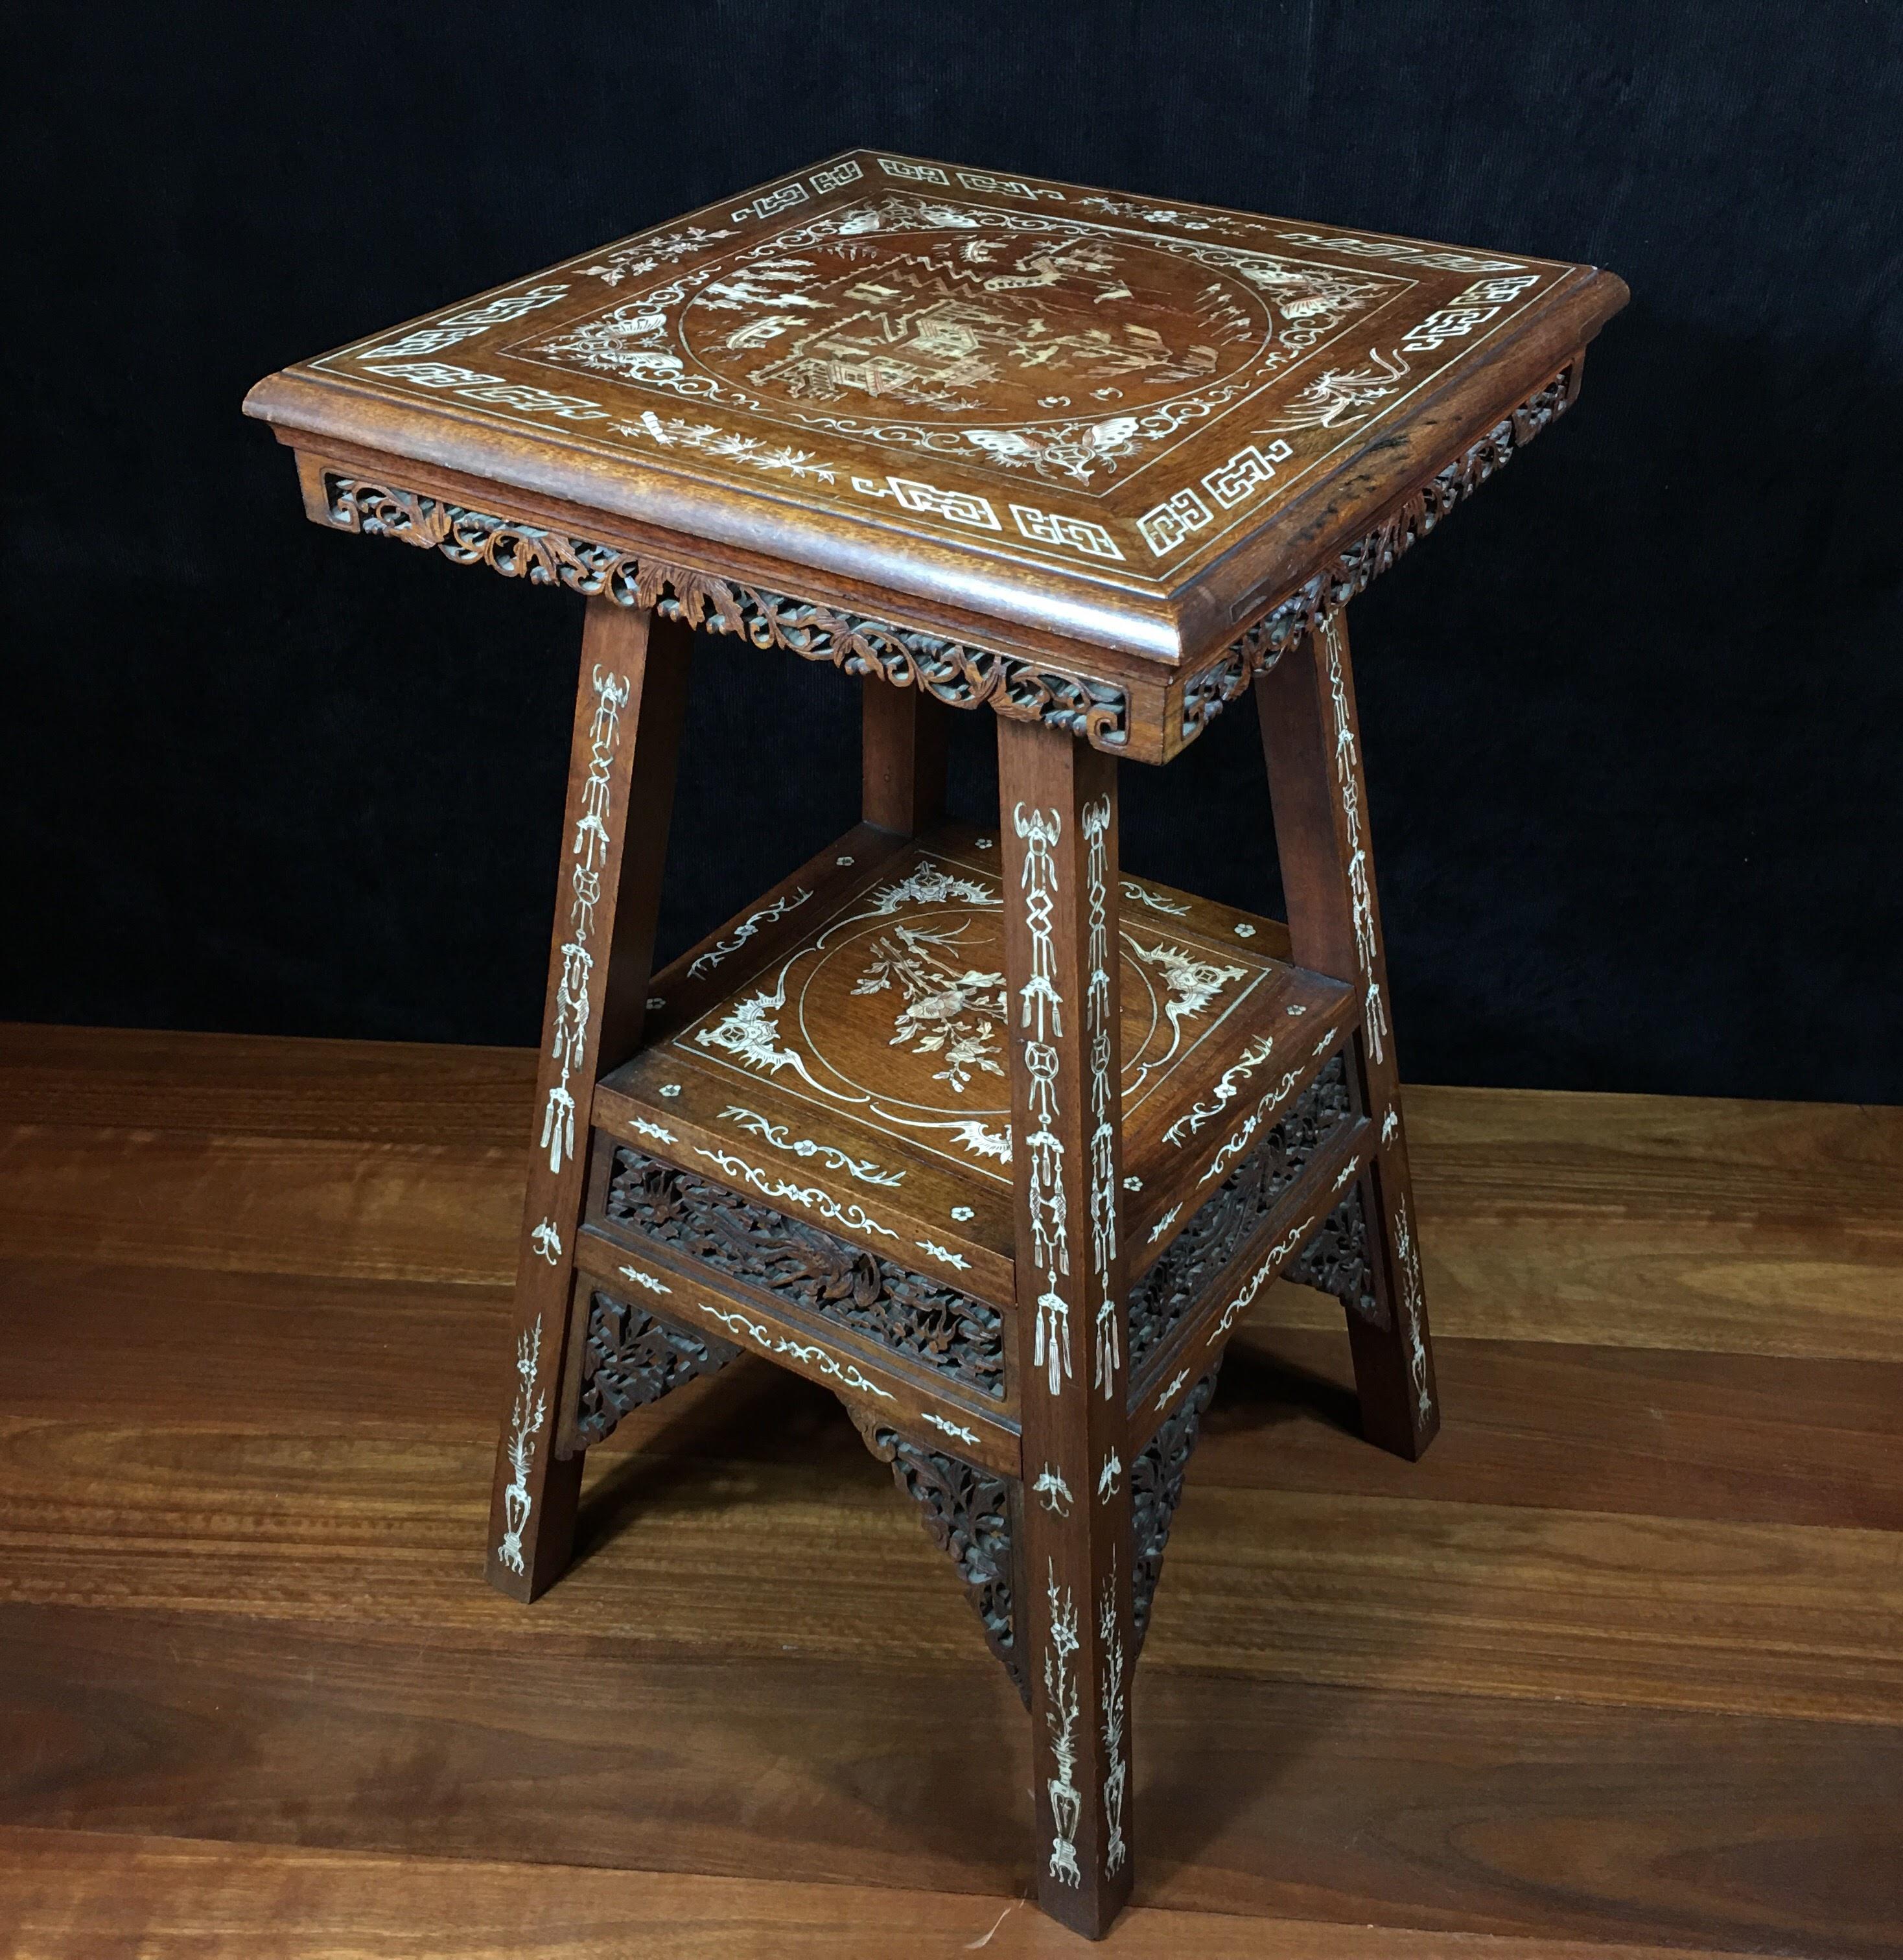 Chinese Hardwood Table with Fine Inlaid Bone Scenes, circa 1925 For Sale 7